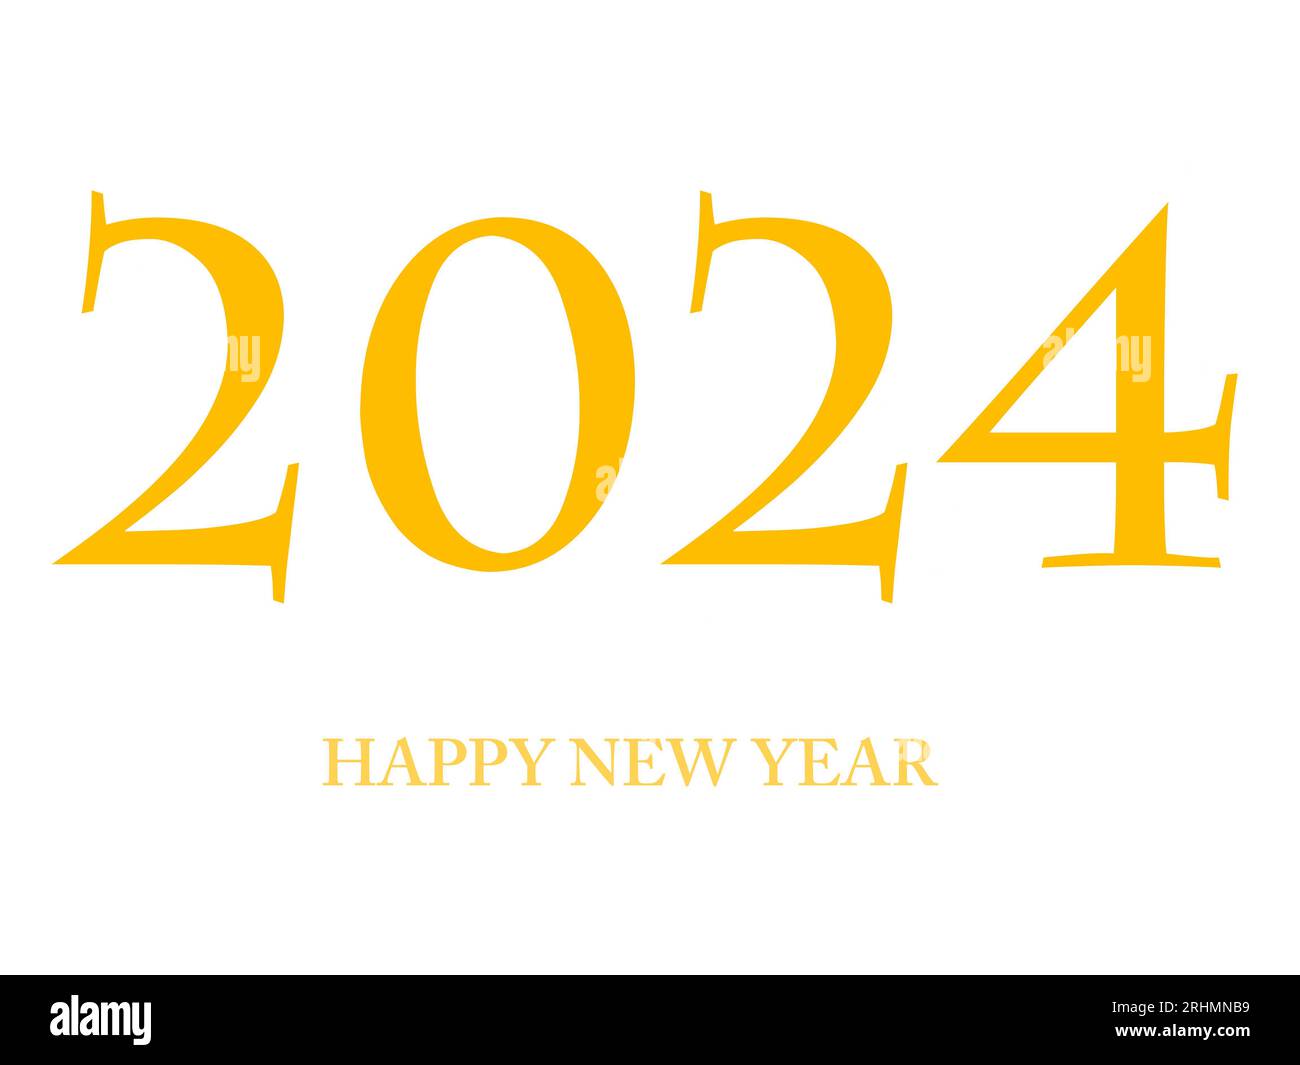 Happy New Year 2024 text design with gold letters. Happy New Year 2024 illustration Stock Photo